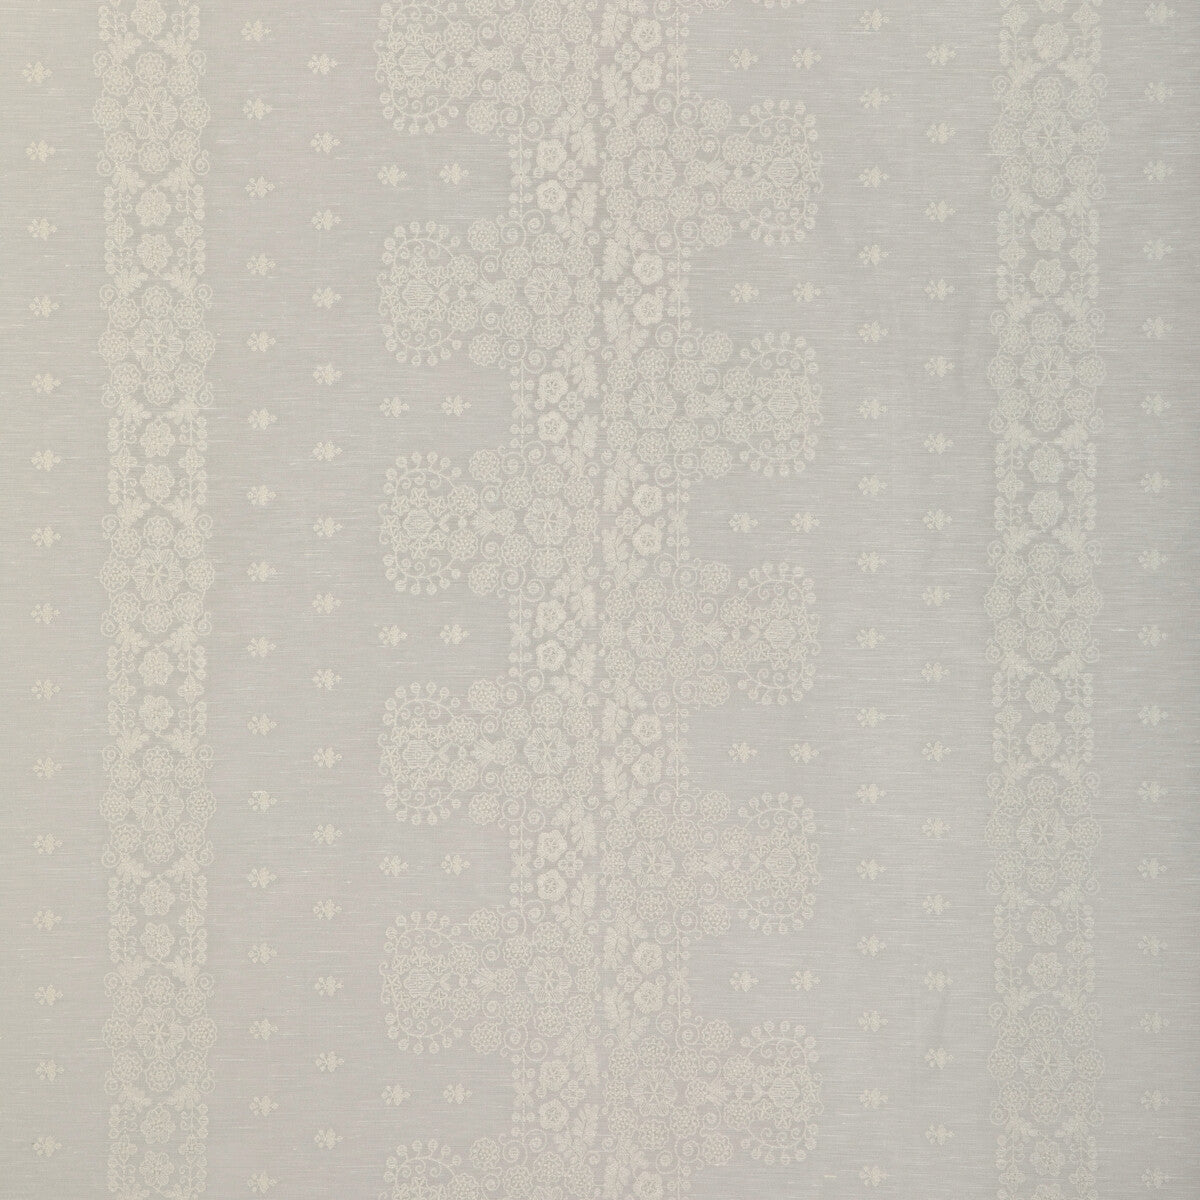 Coulet Sheer fabric in ivory color - pattern 8023109.1.0 - by Brunschwig &amp; Fils in the Anduze Embroideries collection